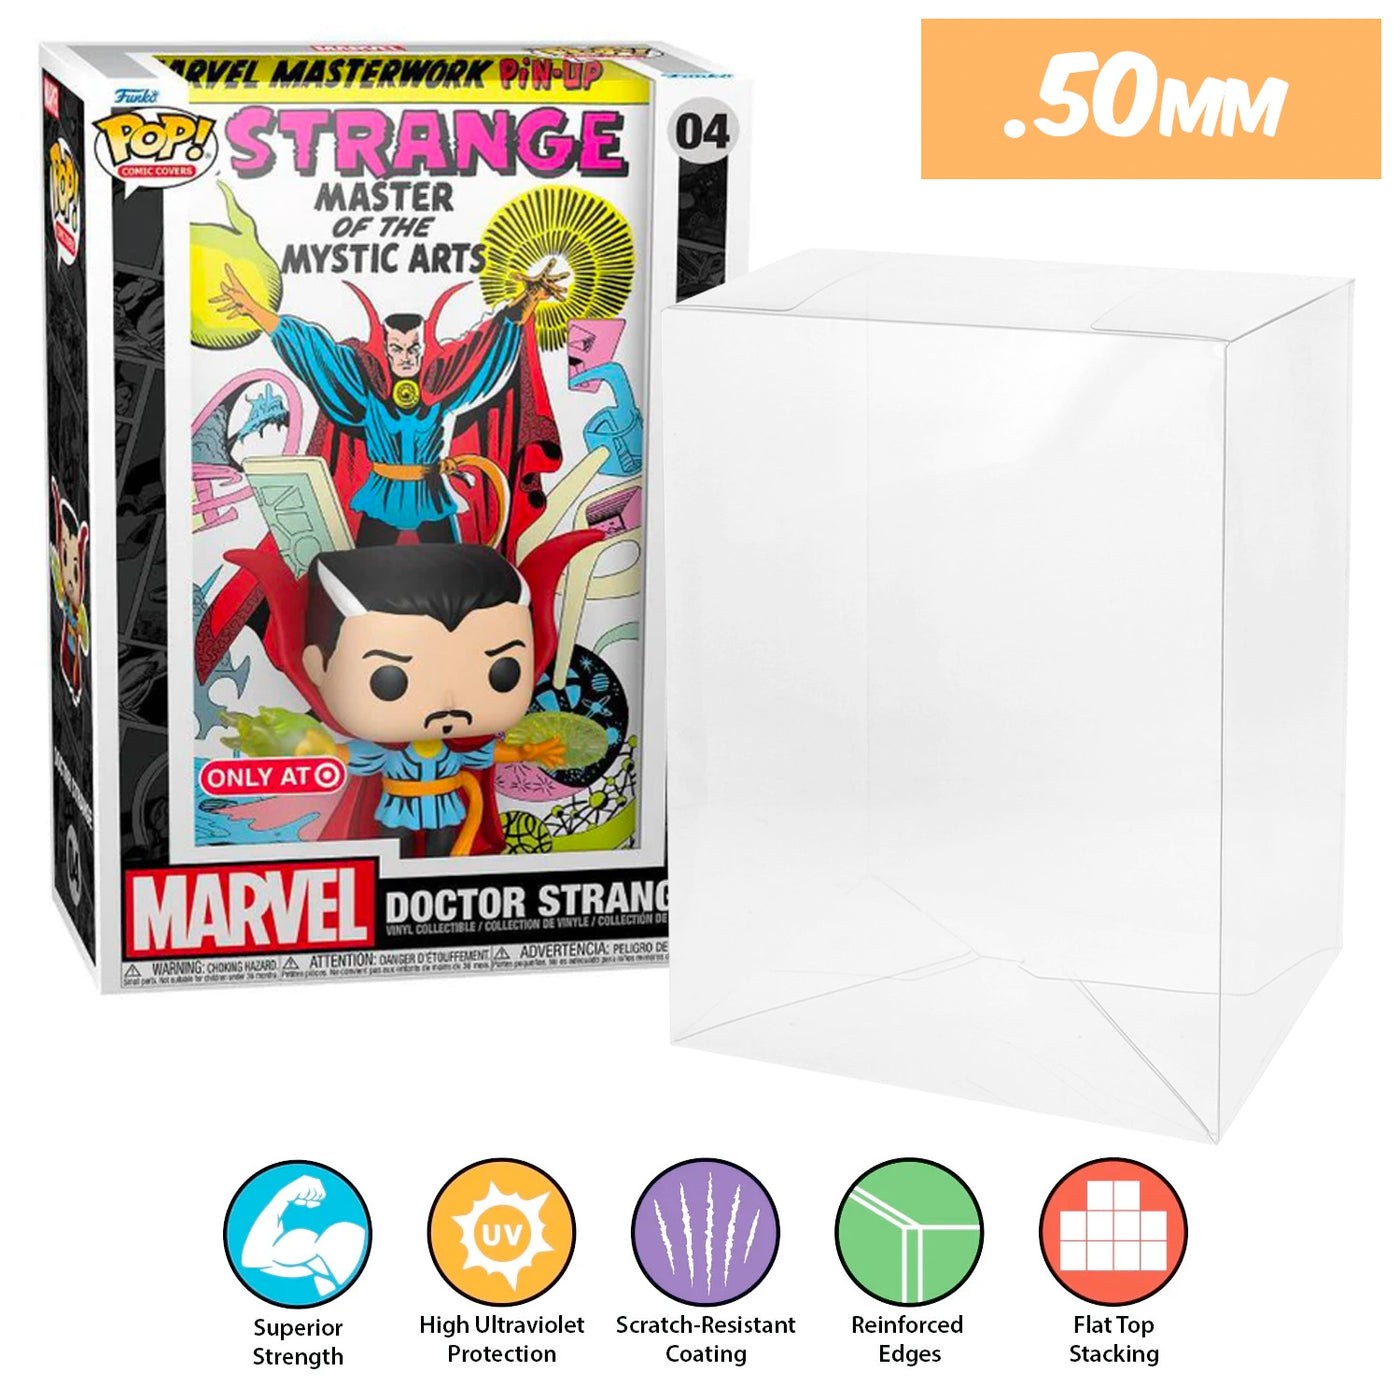 marvel doctor strange target pop comic covers best funko pop protectors thick strong uv scratch flat top stack vinyl display geek plastic shield vaulted eco armor fits collect protect display case kollector protector